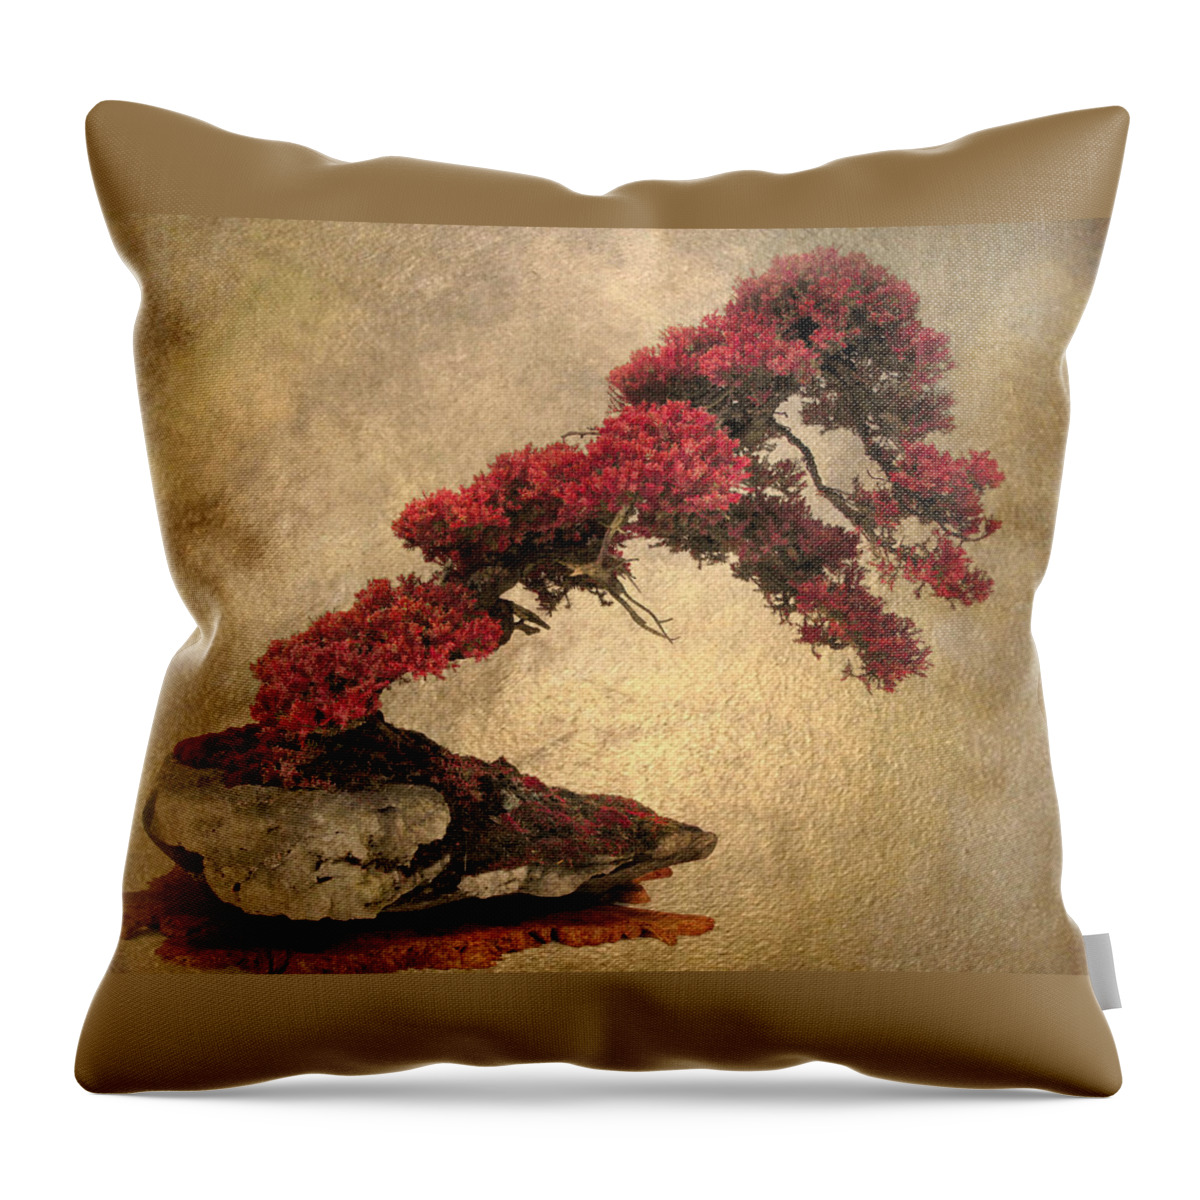 Bonsai Throw Pillow featuring the photograph Bonsai Display by Jessica Jenney